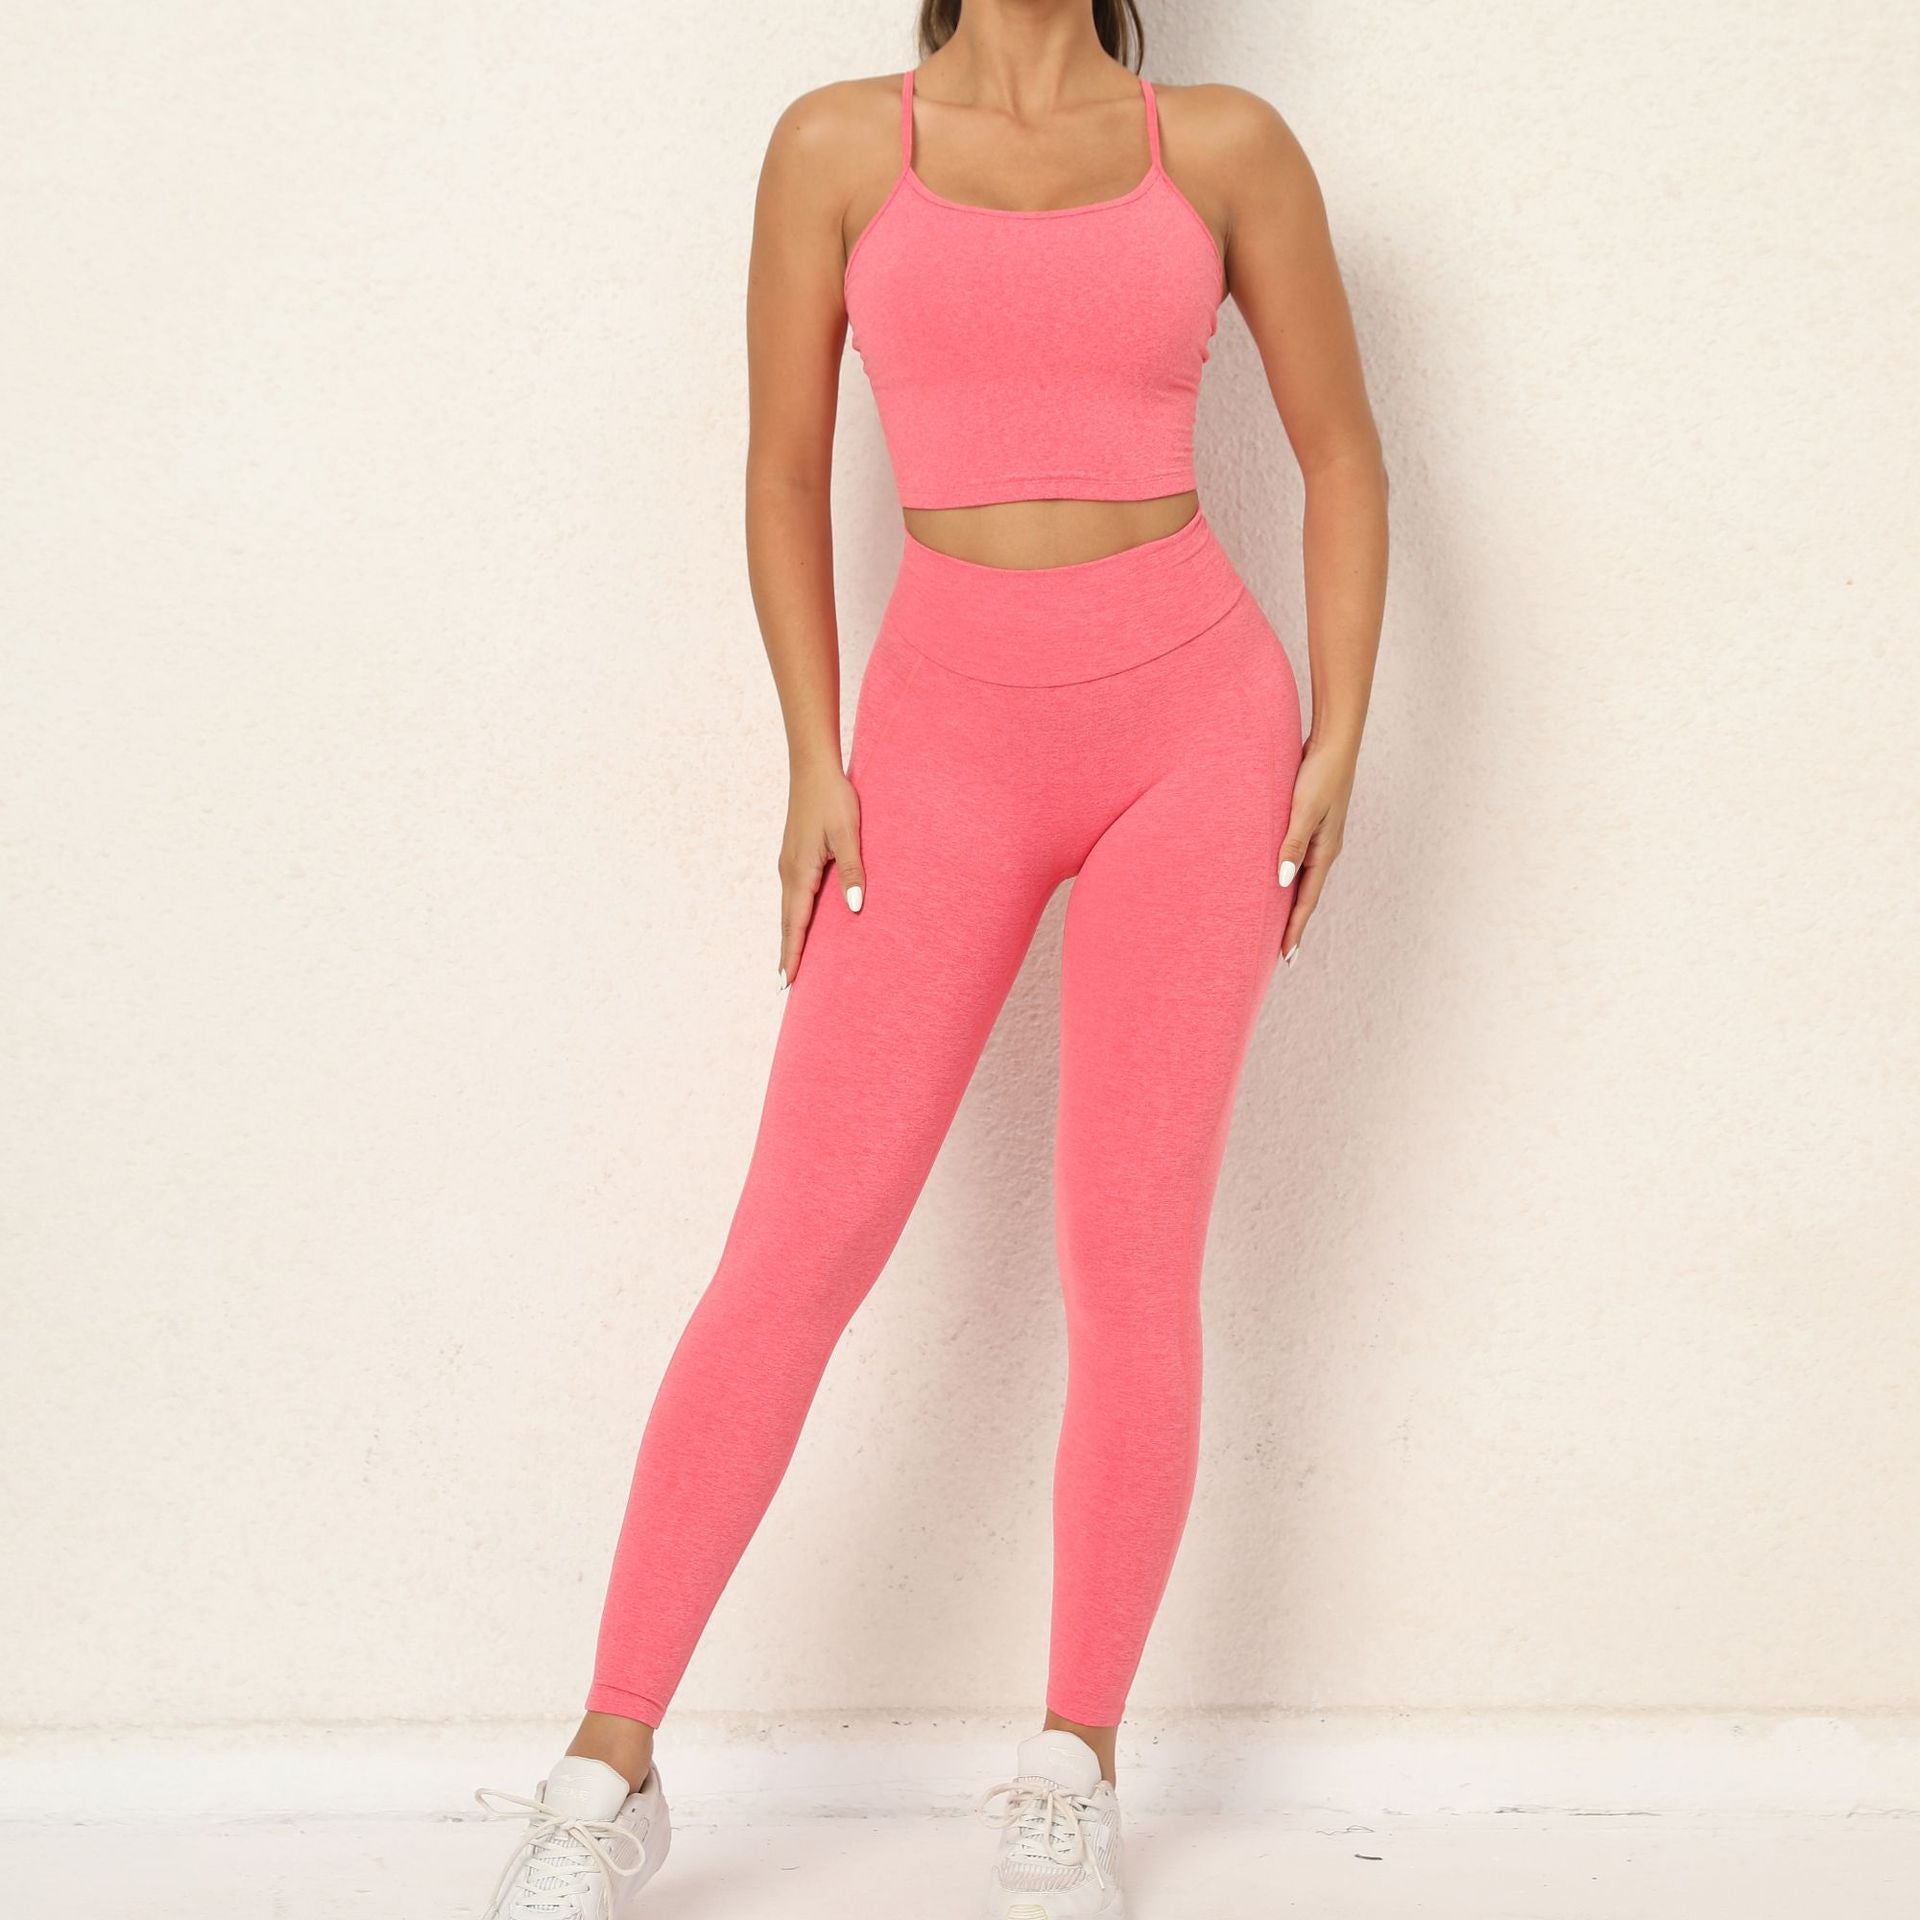 Sexy High Waist Yoga Suits for Women-Activewear-Free Shipping at meselling99